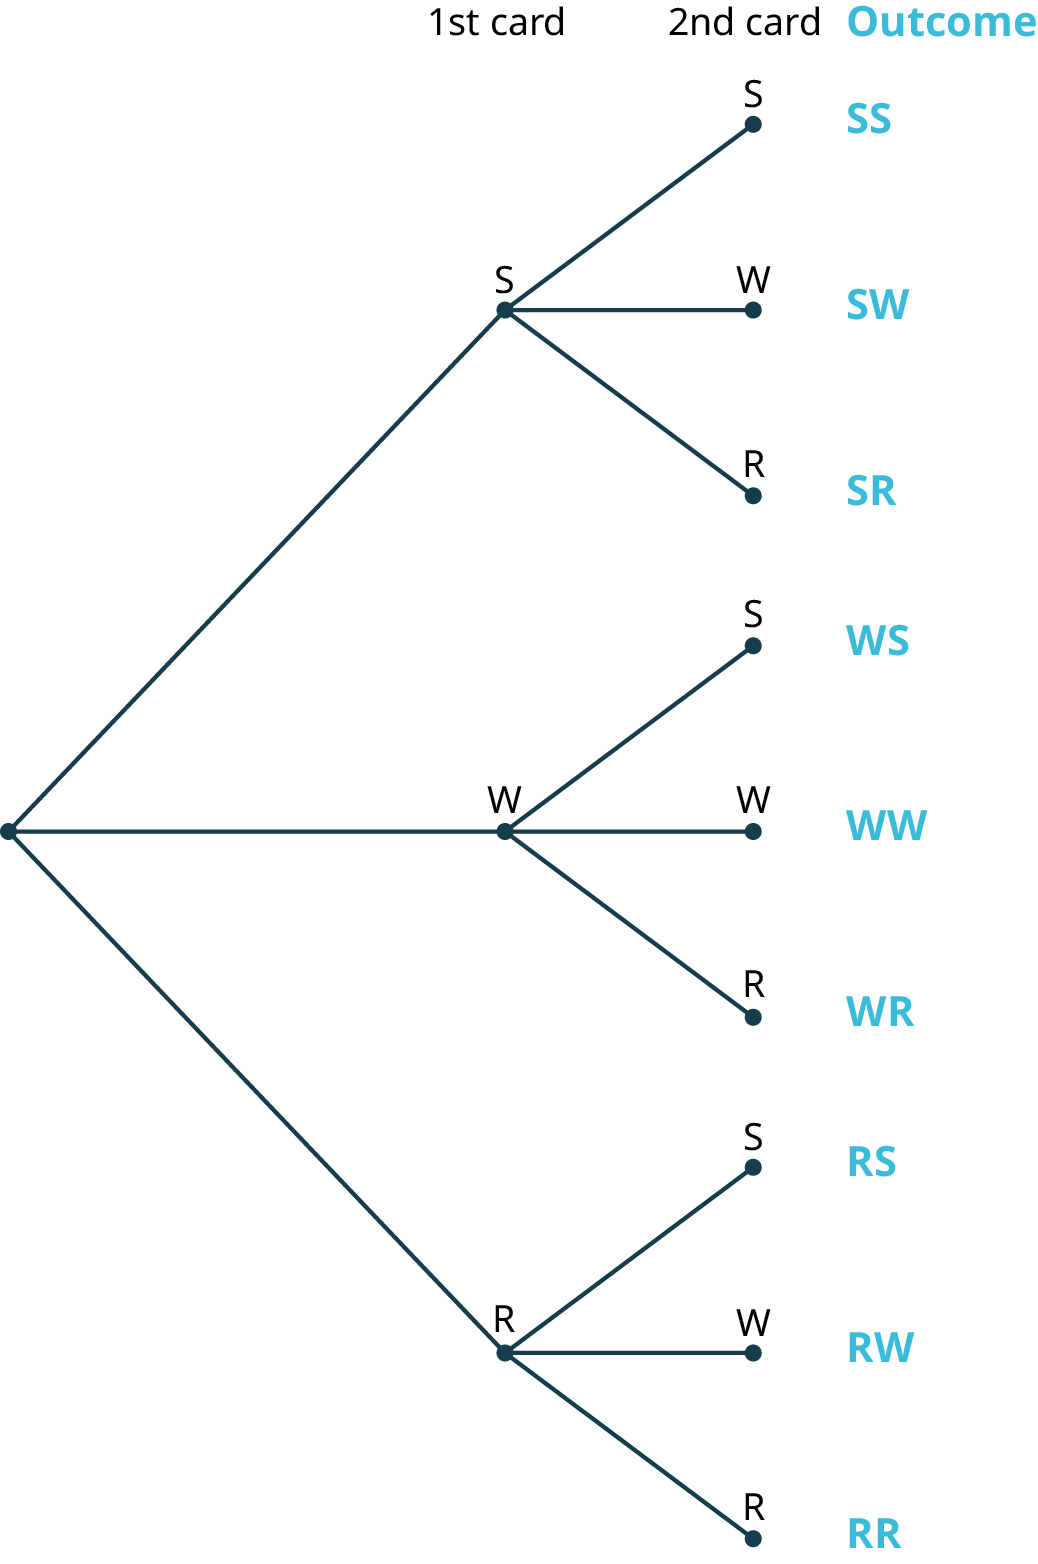 A tree diagram with three stages. The diagram shows a node in the first stage branching into three nodes labeled S, W, and R in the second stage. The second stage represents the first card. The third stage representing the second card is as follows. The node, S branches into three nodes labeled S, W, and R. The node, W branches into three nodes labeled S, W, and R. The node, R branches into three nodes labeled S, W, and R. The possible outcomes are as follows: S S, S W, S R, W S, W W, W R, R S, R W, and R R.